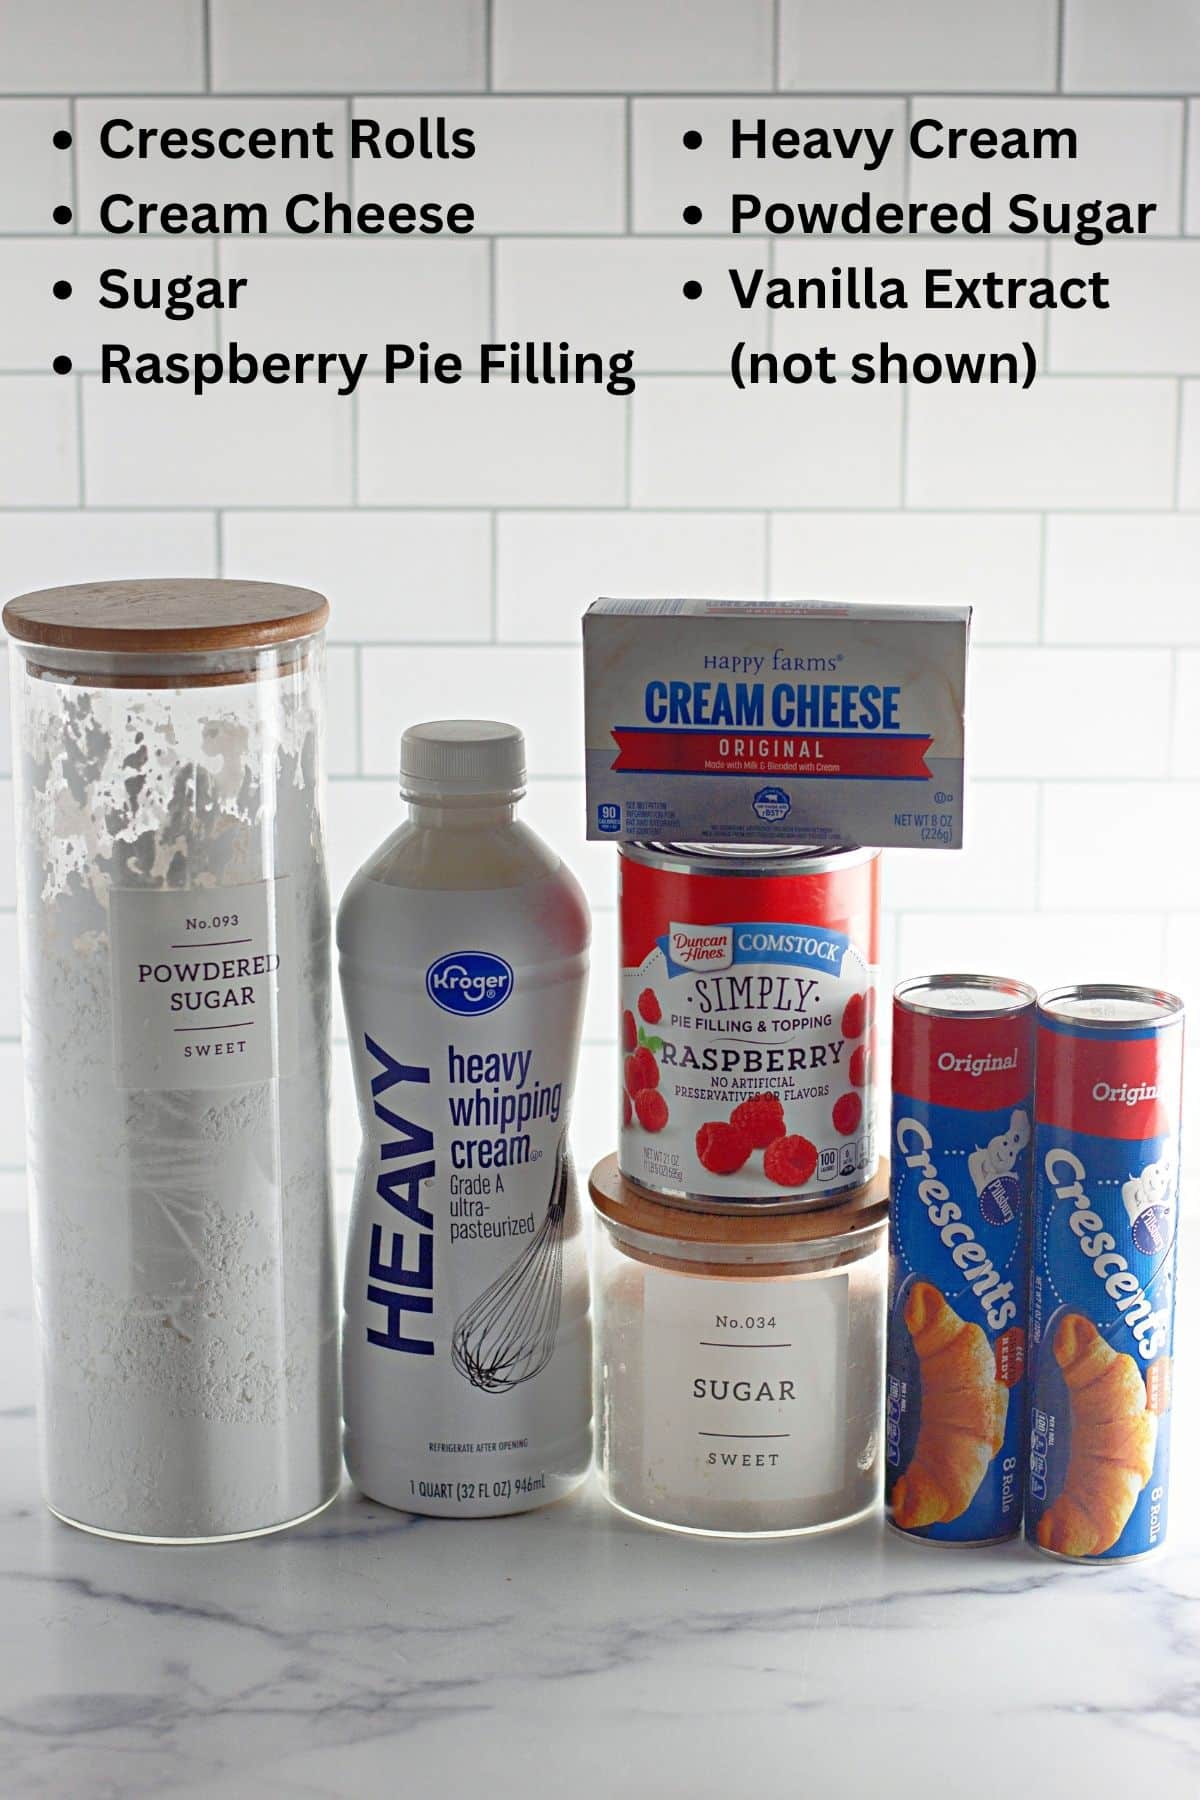 Ingredients shown to make a raspberry pastry wreath.